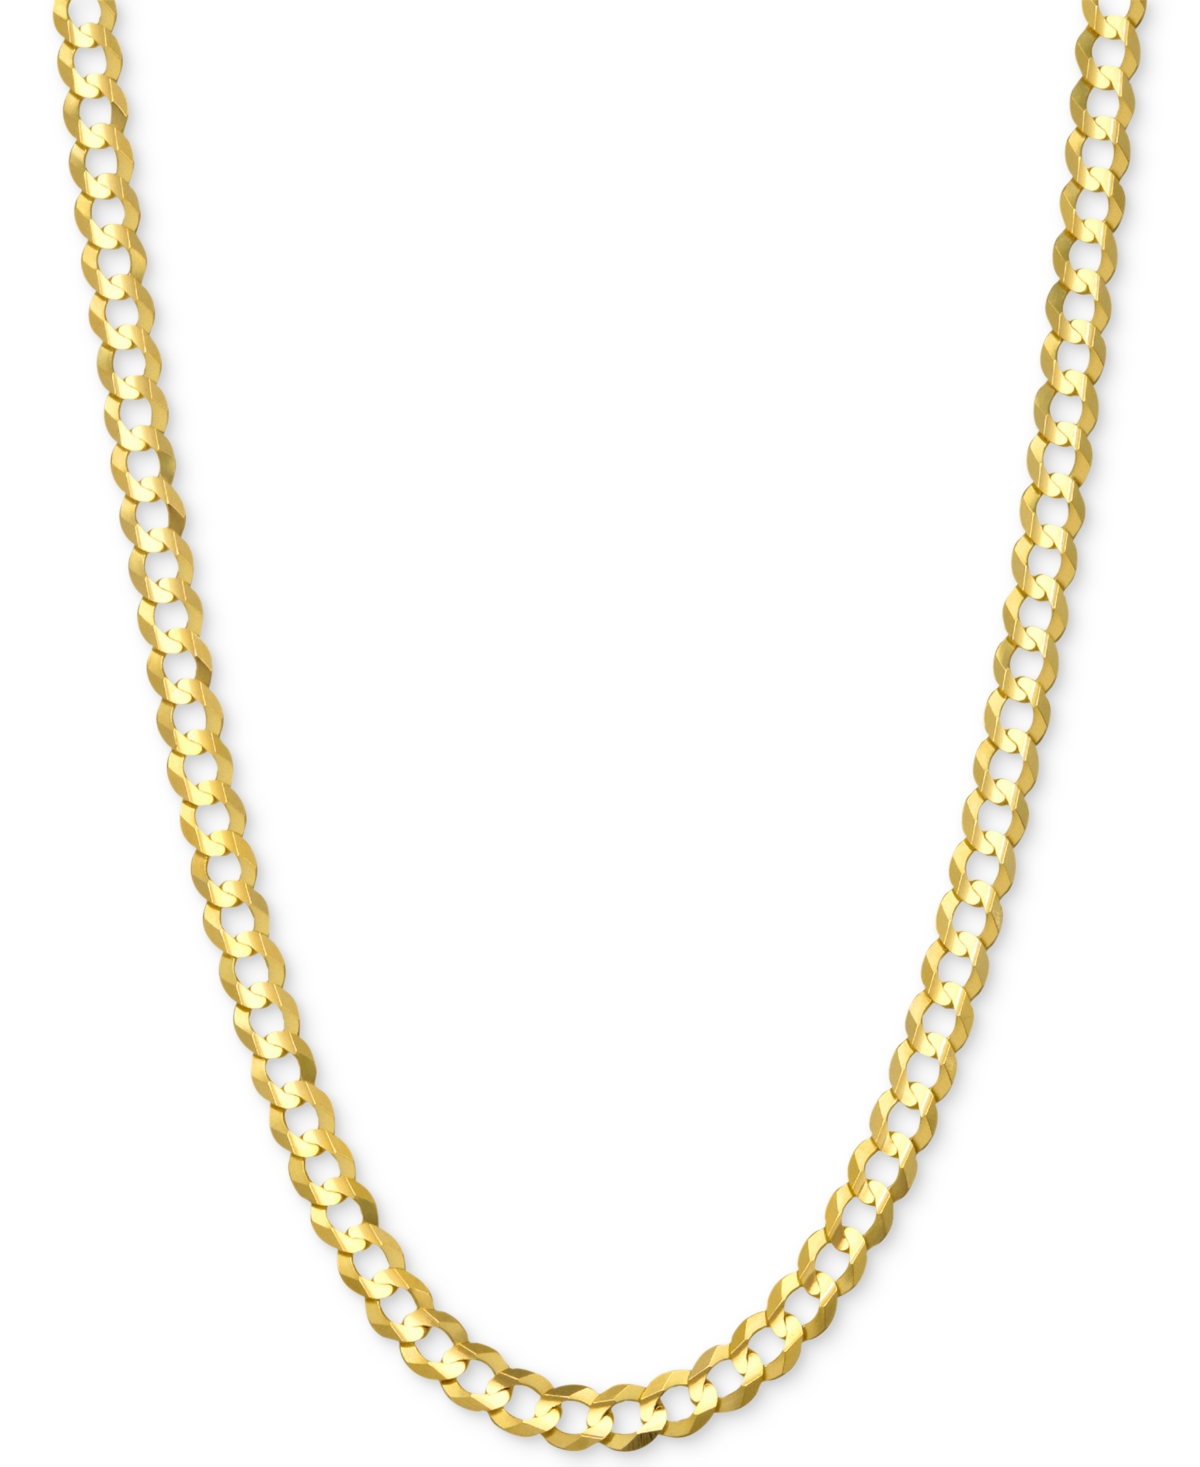 20" Open Curb Link Chain Necklace (3-5/8mm) in Solid 14k Gold - Gold